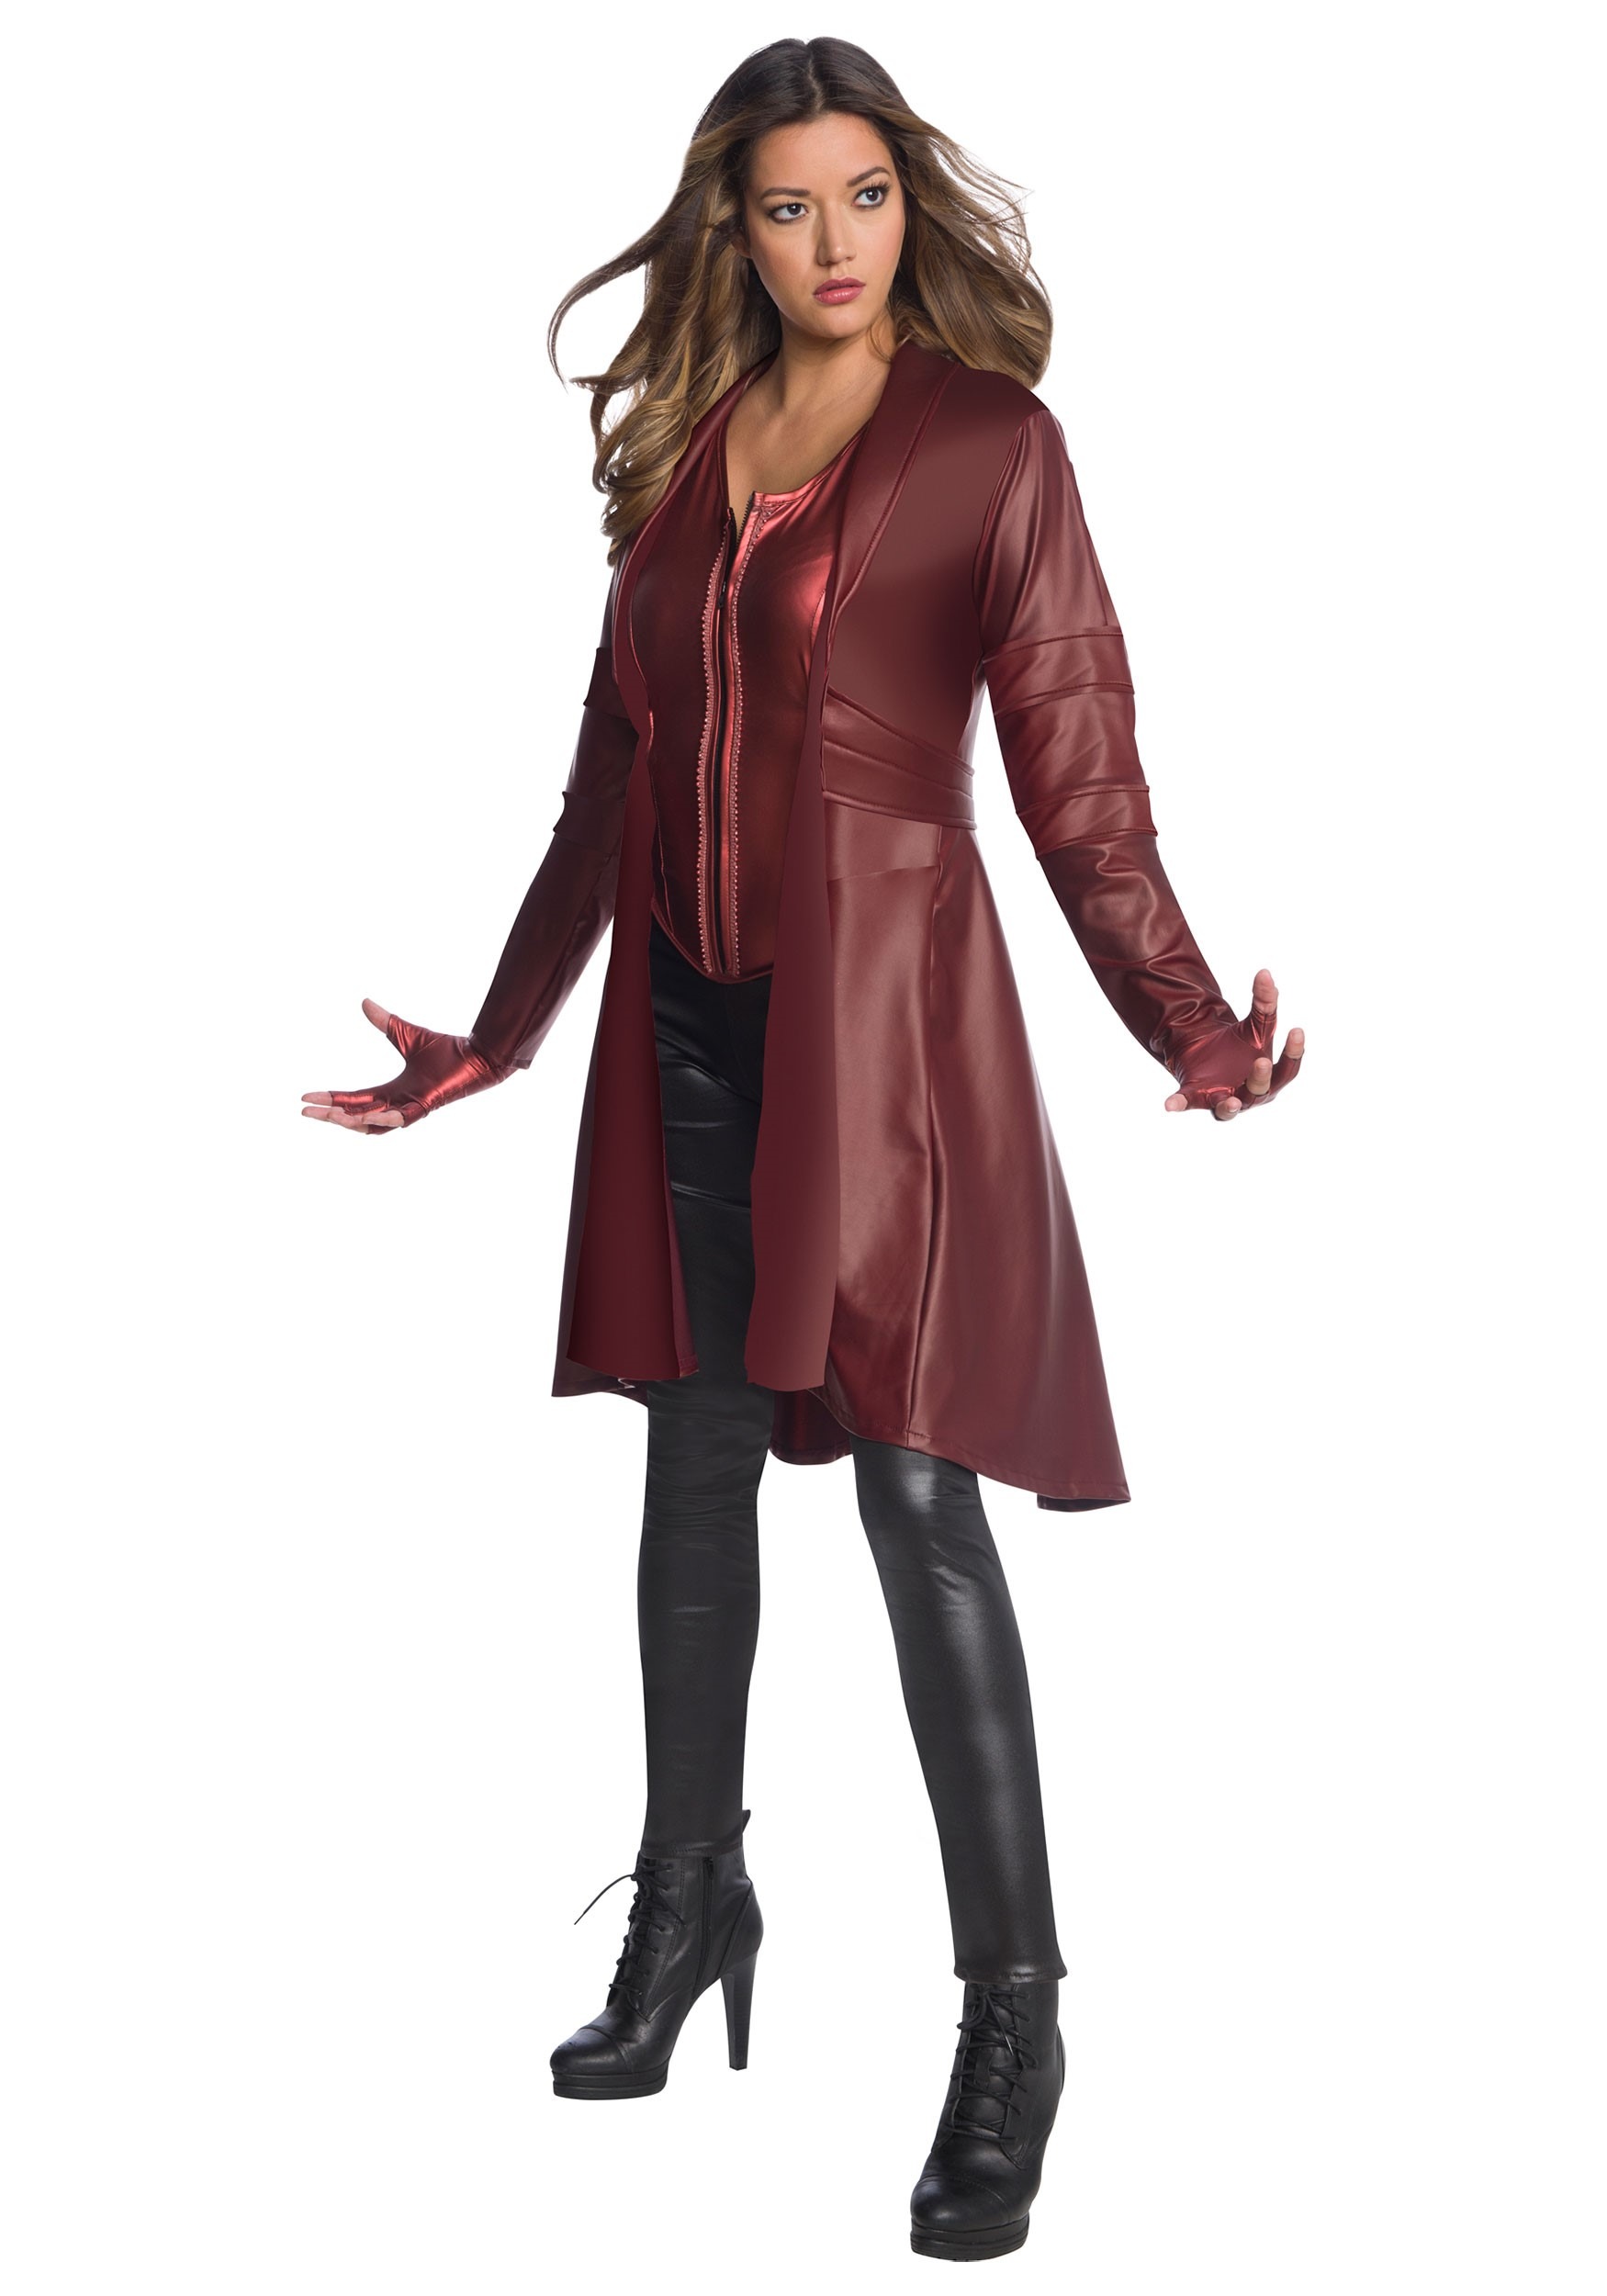 Image of Avengers Endgame Secret Wishes Scarlet Witch Women's Costume ID RU701053-S